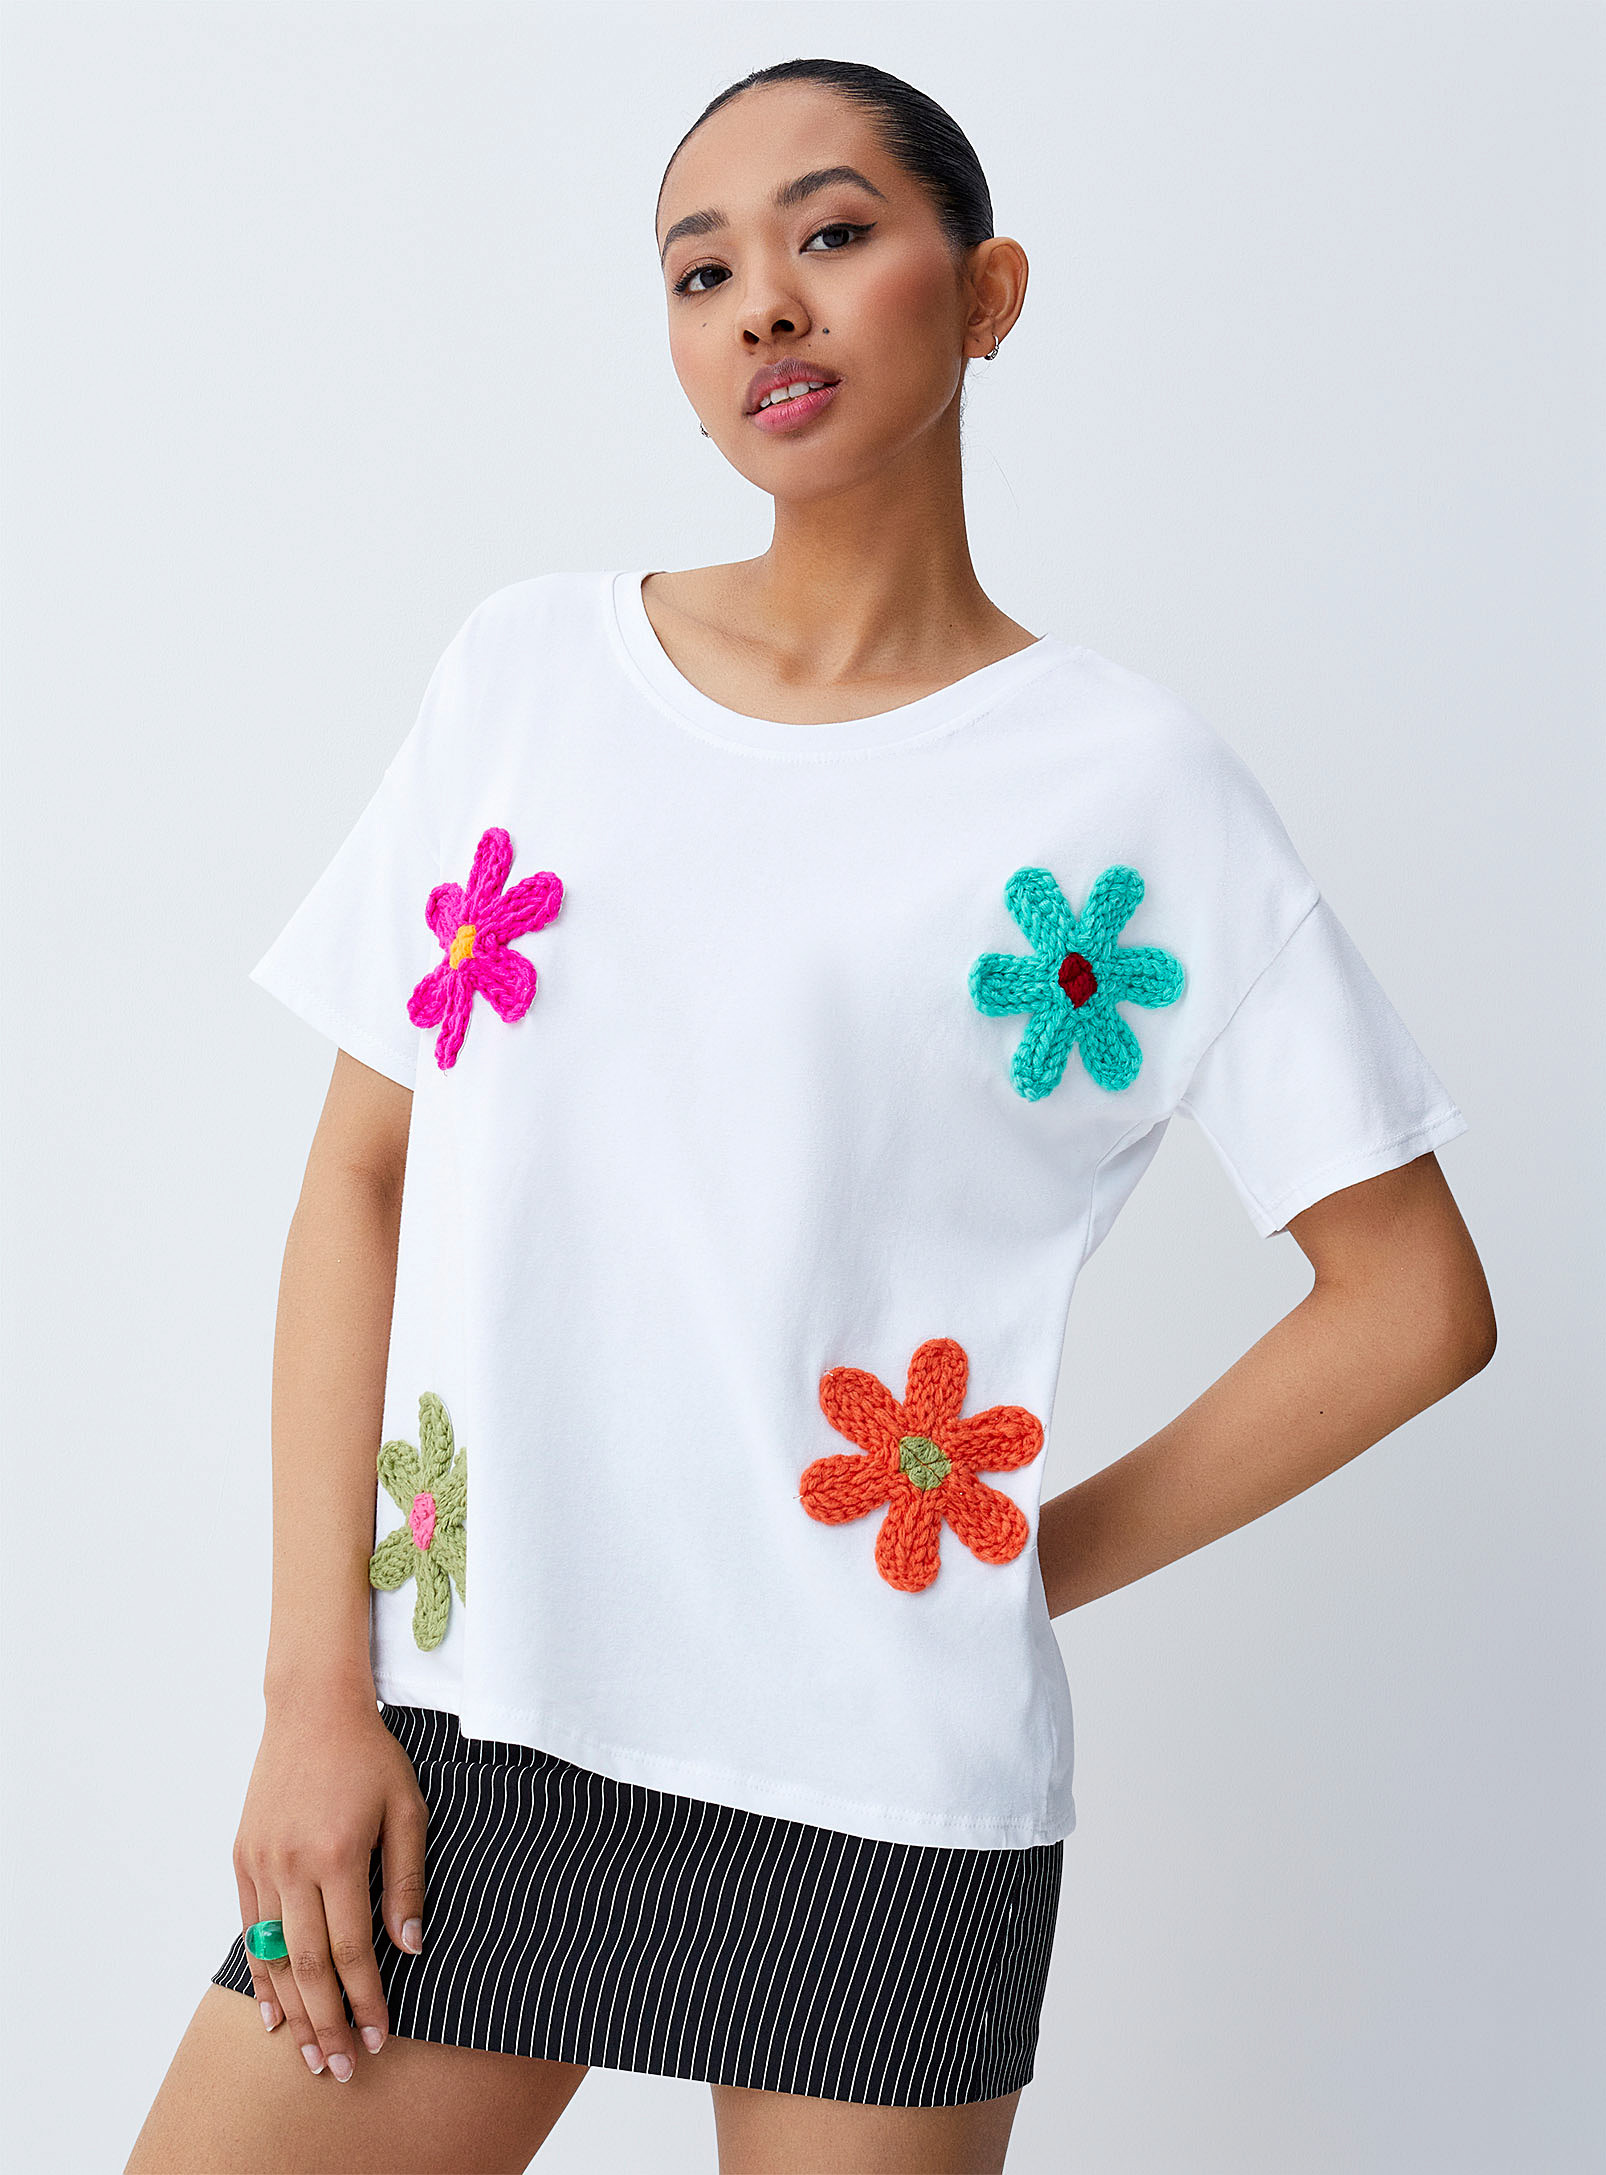 Twik Colourful Crocheted Flowers T-shirt In White